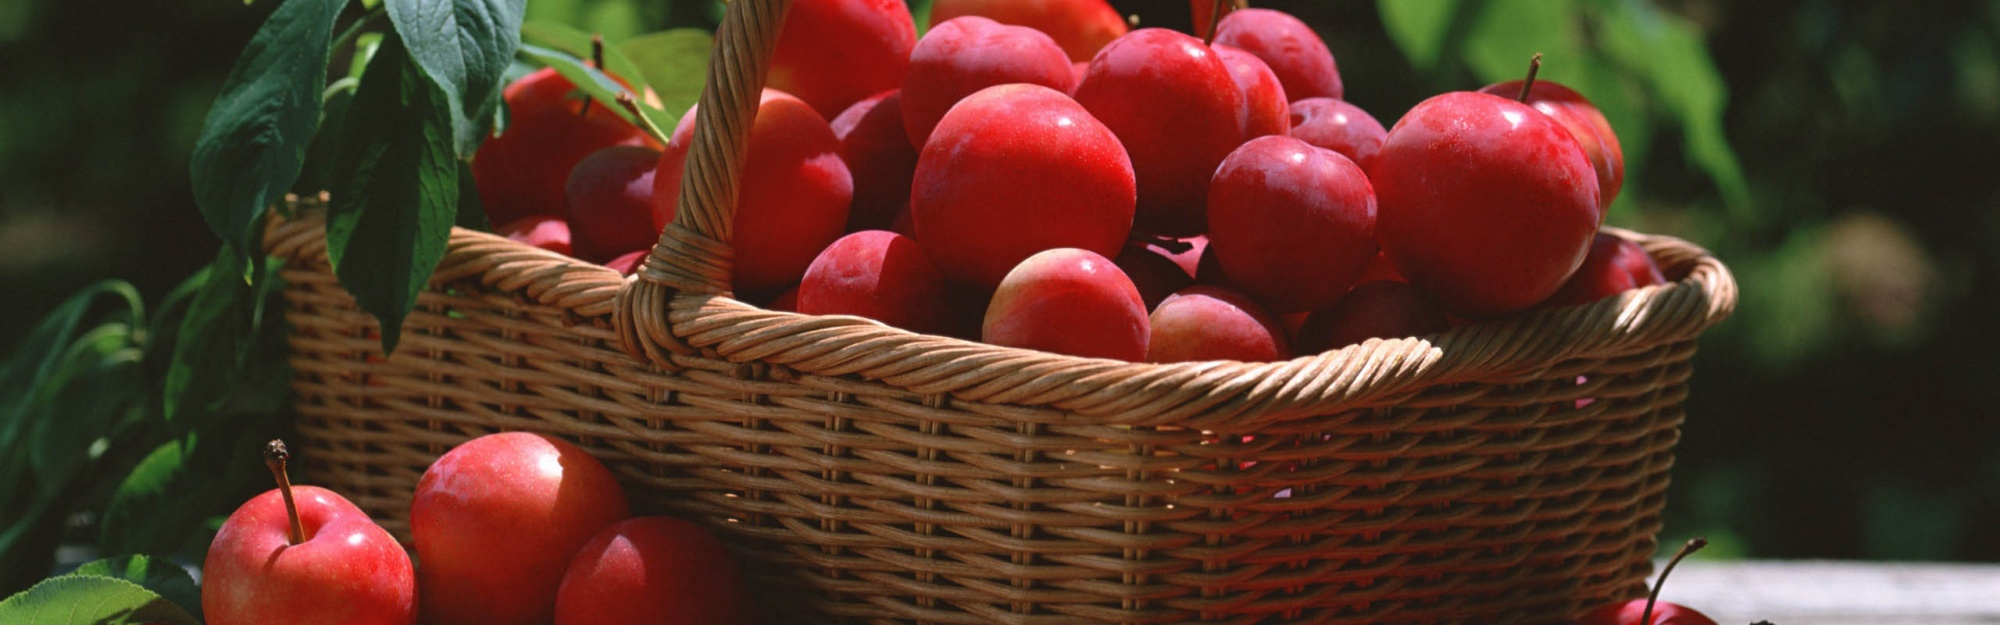 Red Plums In A Basket